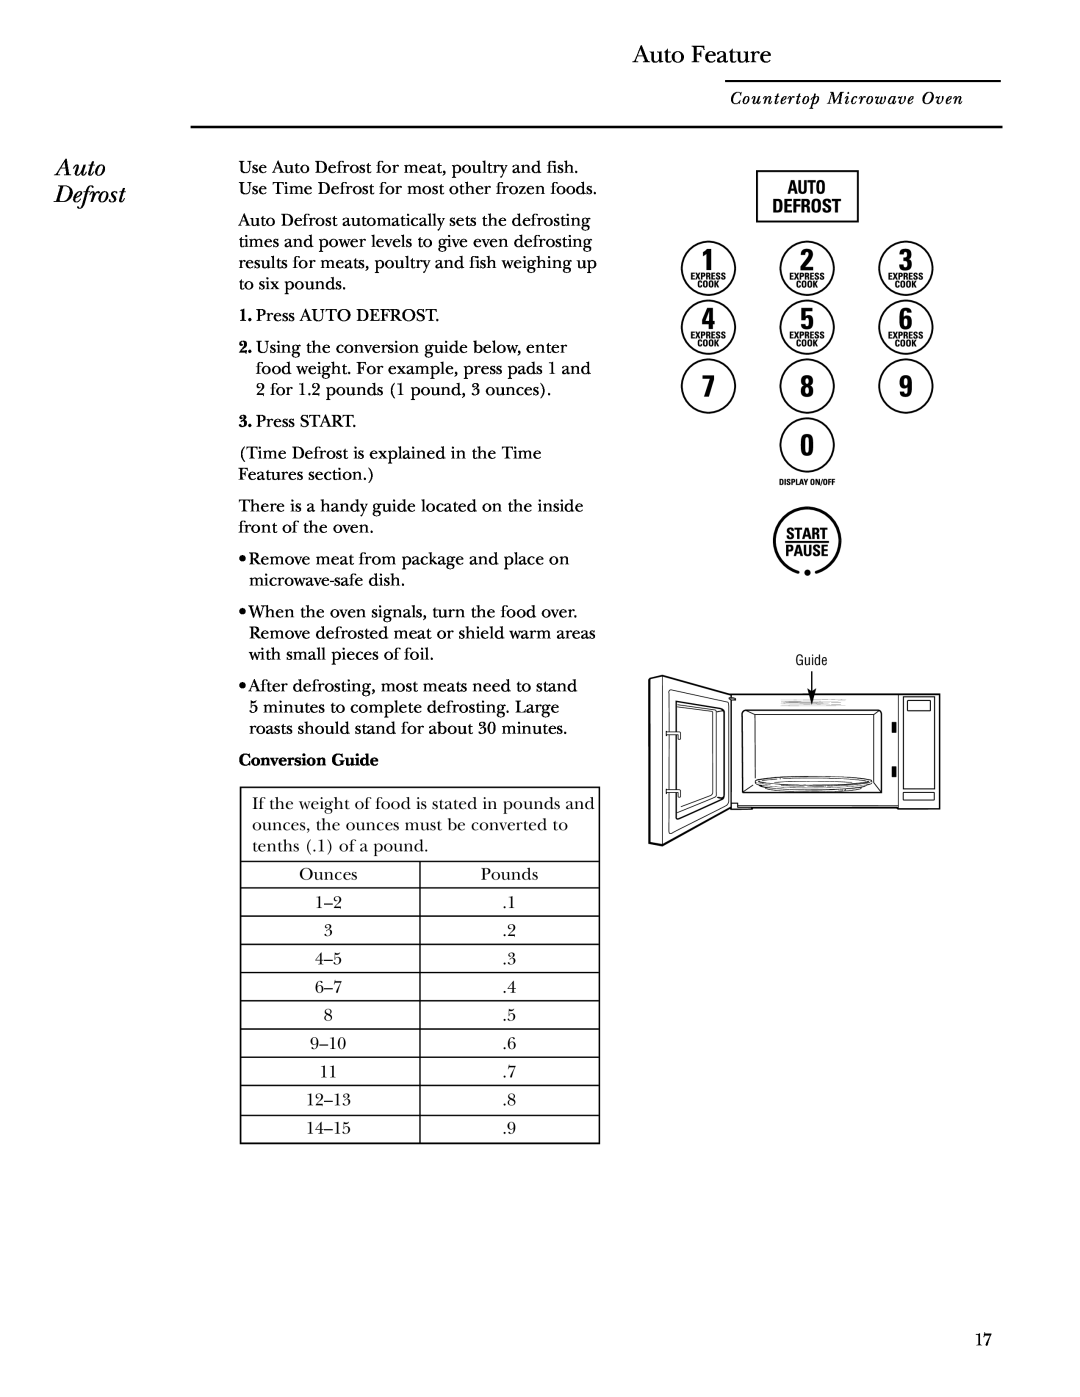 GE ZE2160 owner manual Auto Defrost, Auto Feature 